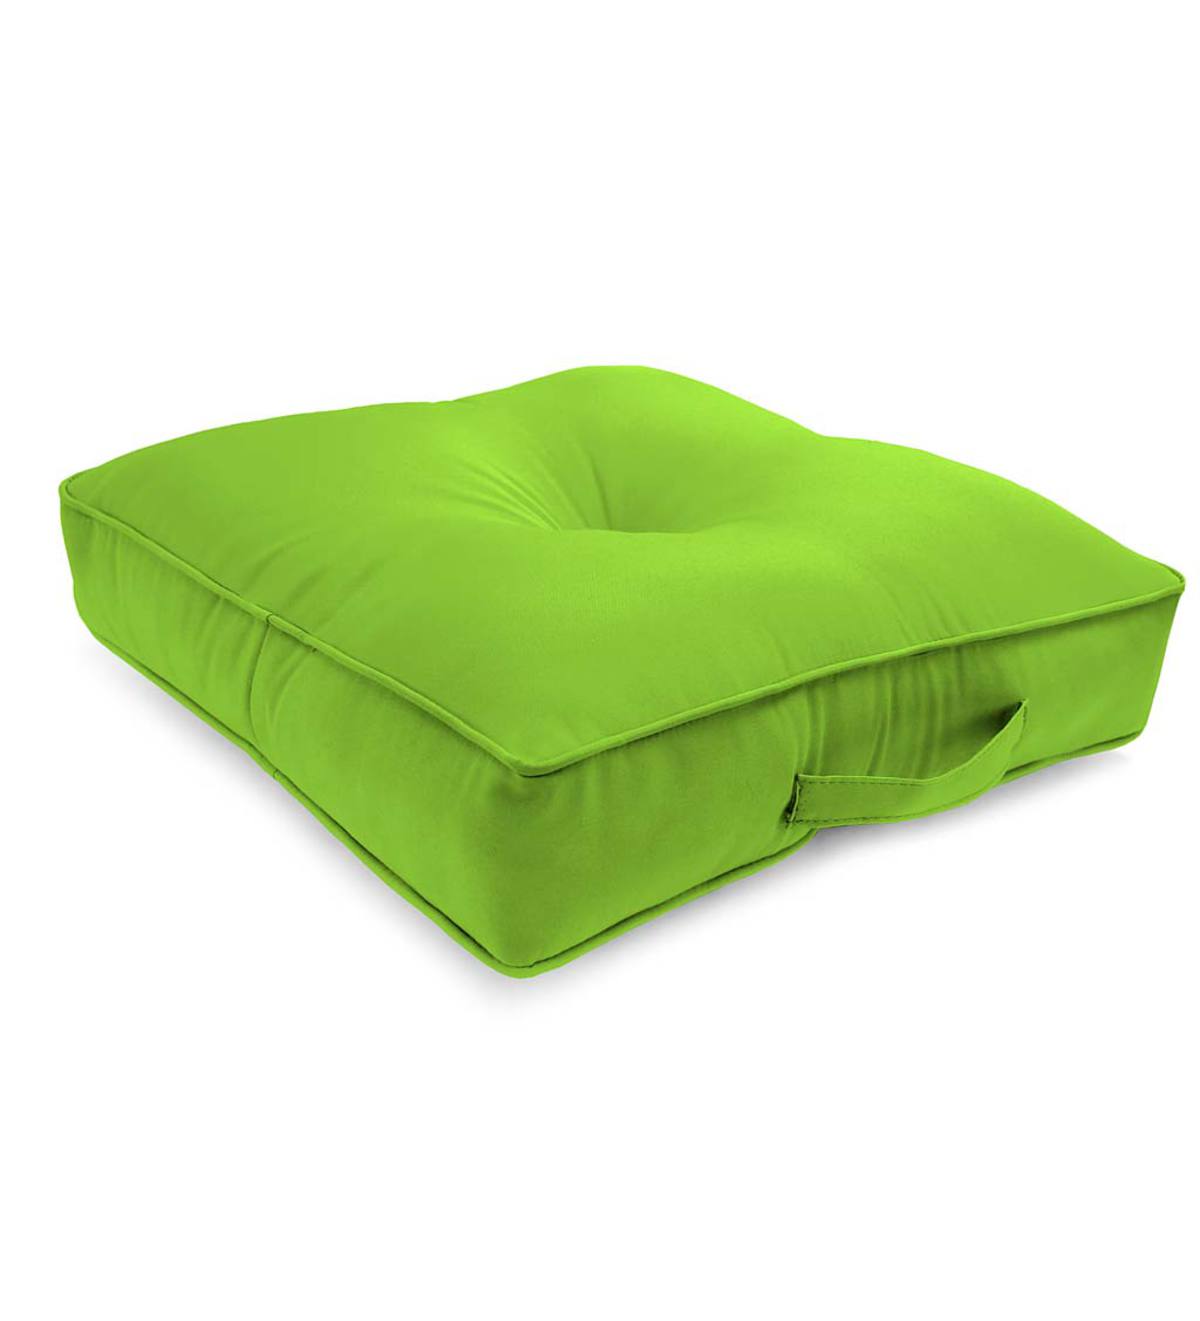 Polyester Classic Tufted Floor Cushion With Handle, 20" sq. x 4"